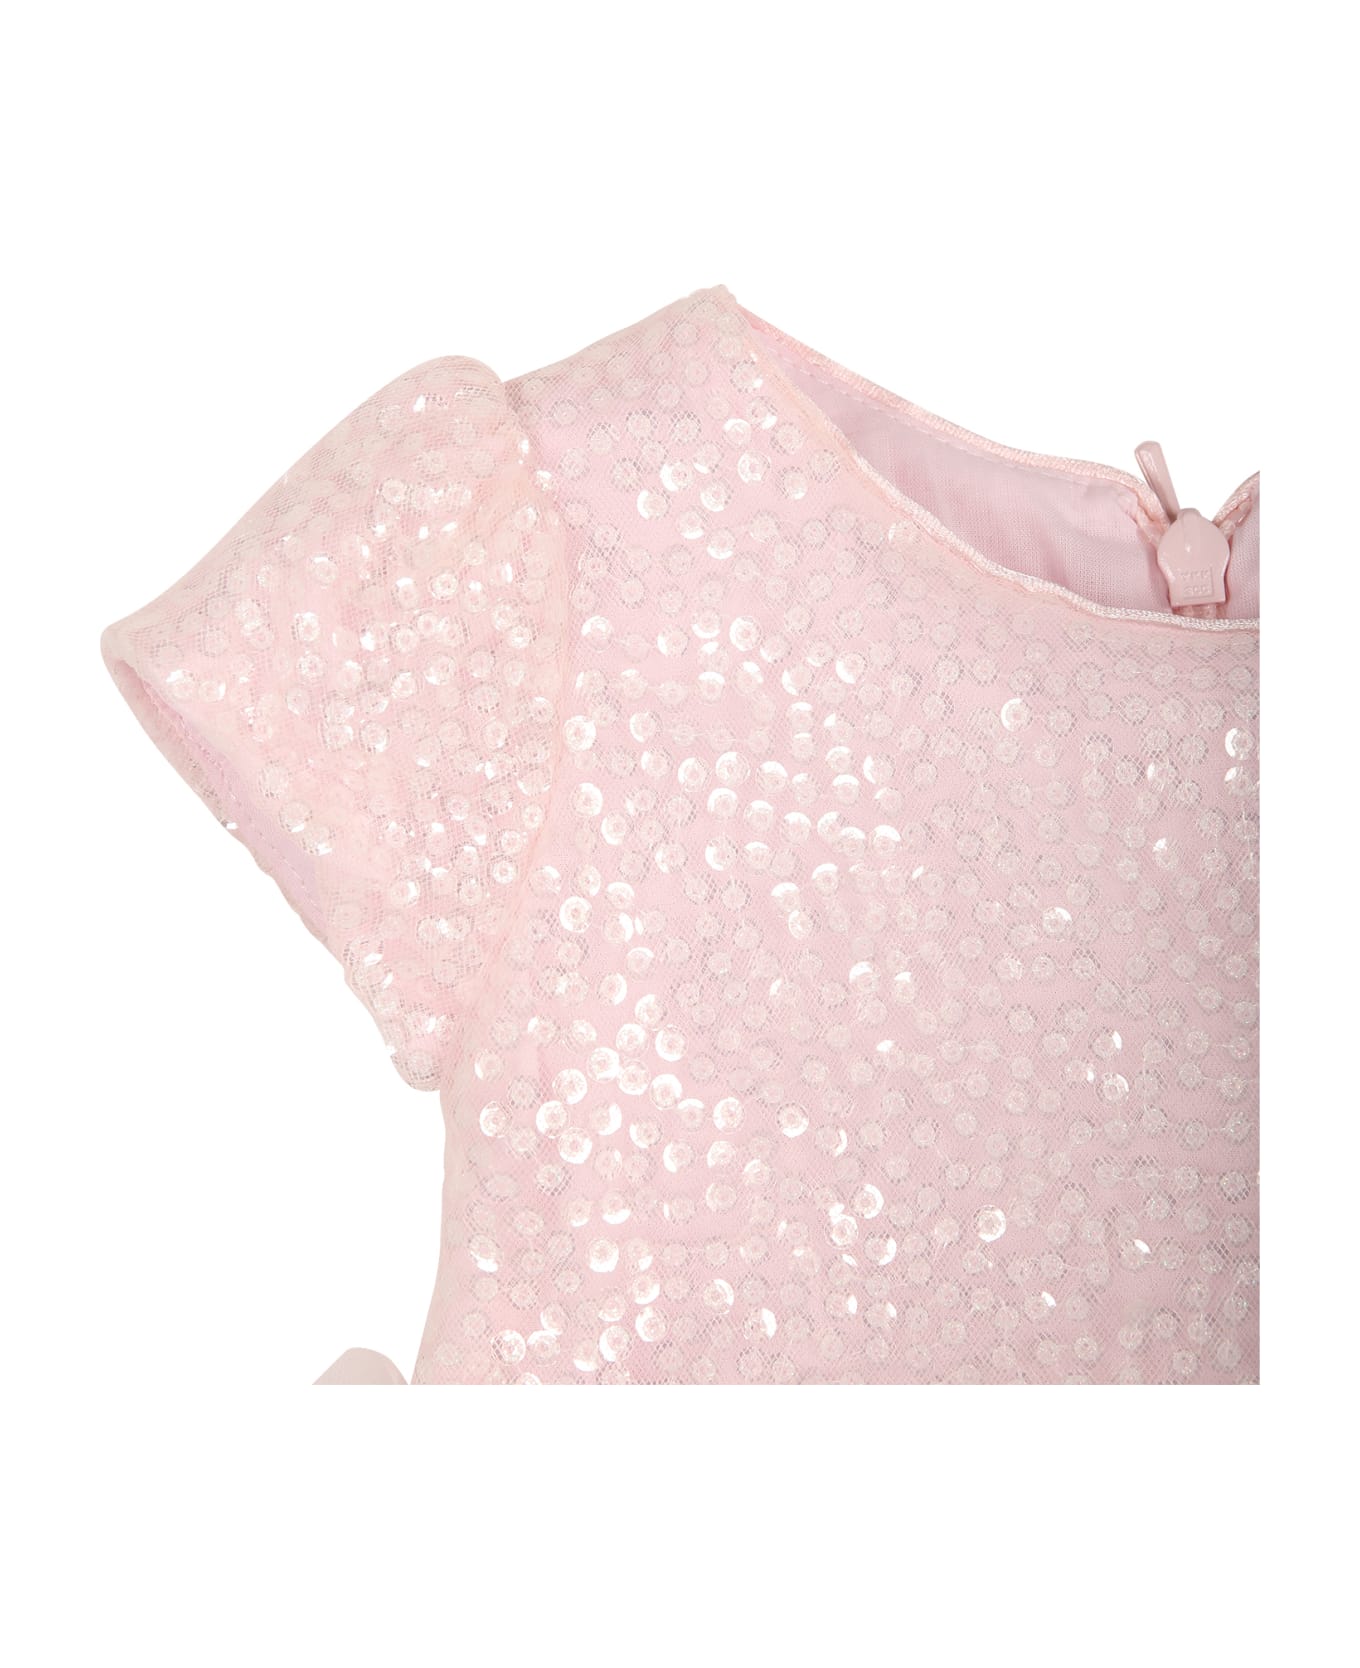 Monnalisa Pink Dress For Baby Girl With Sequins - Pink